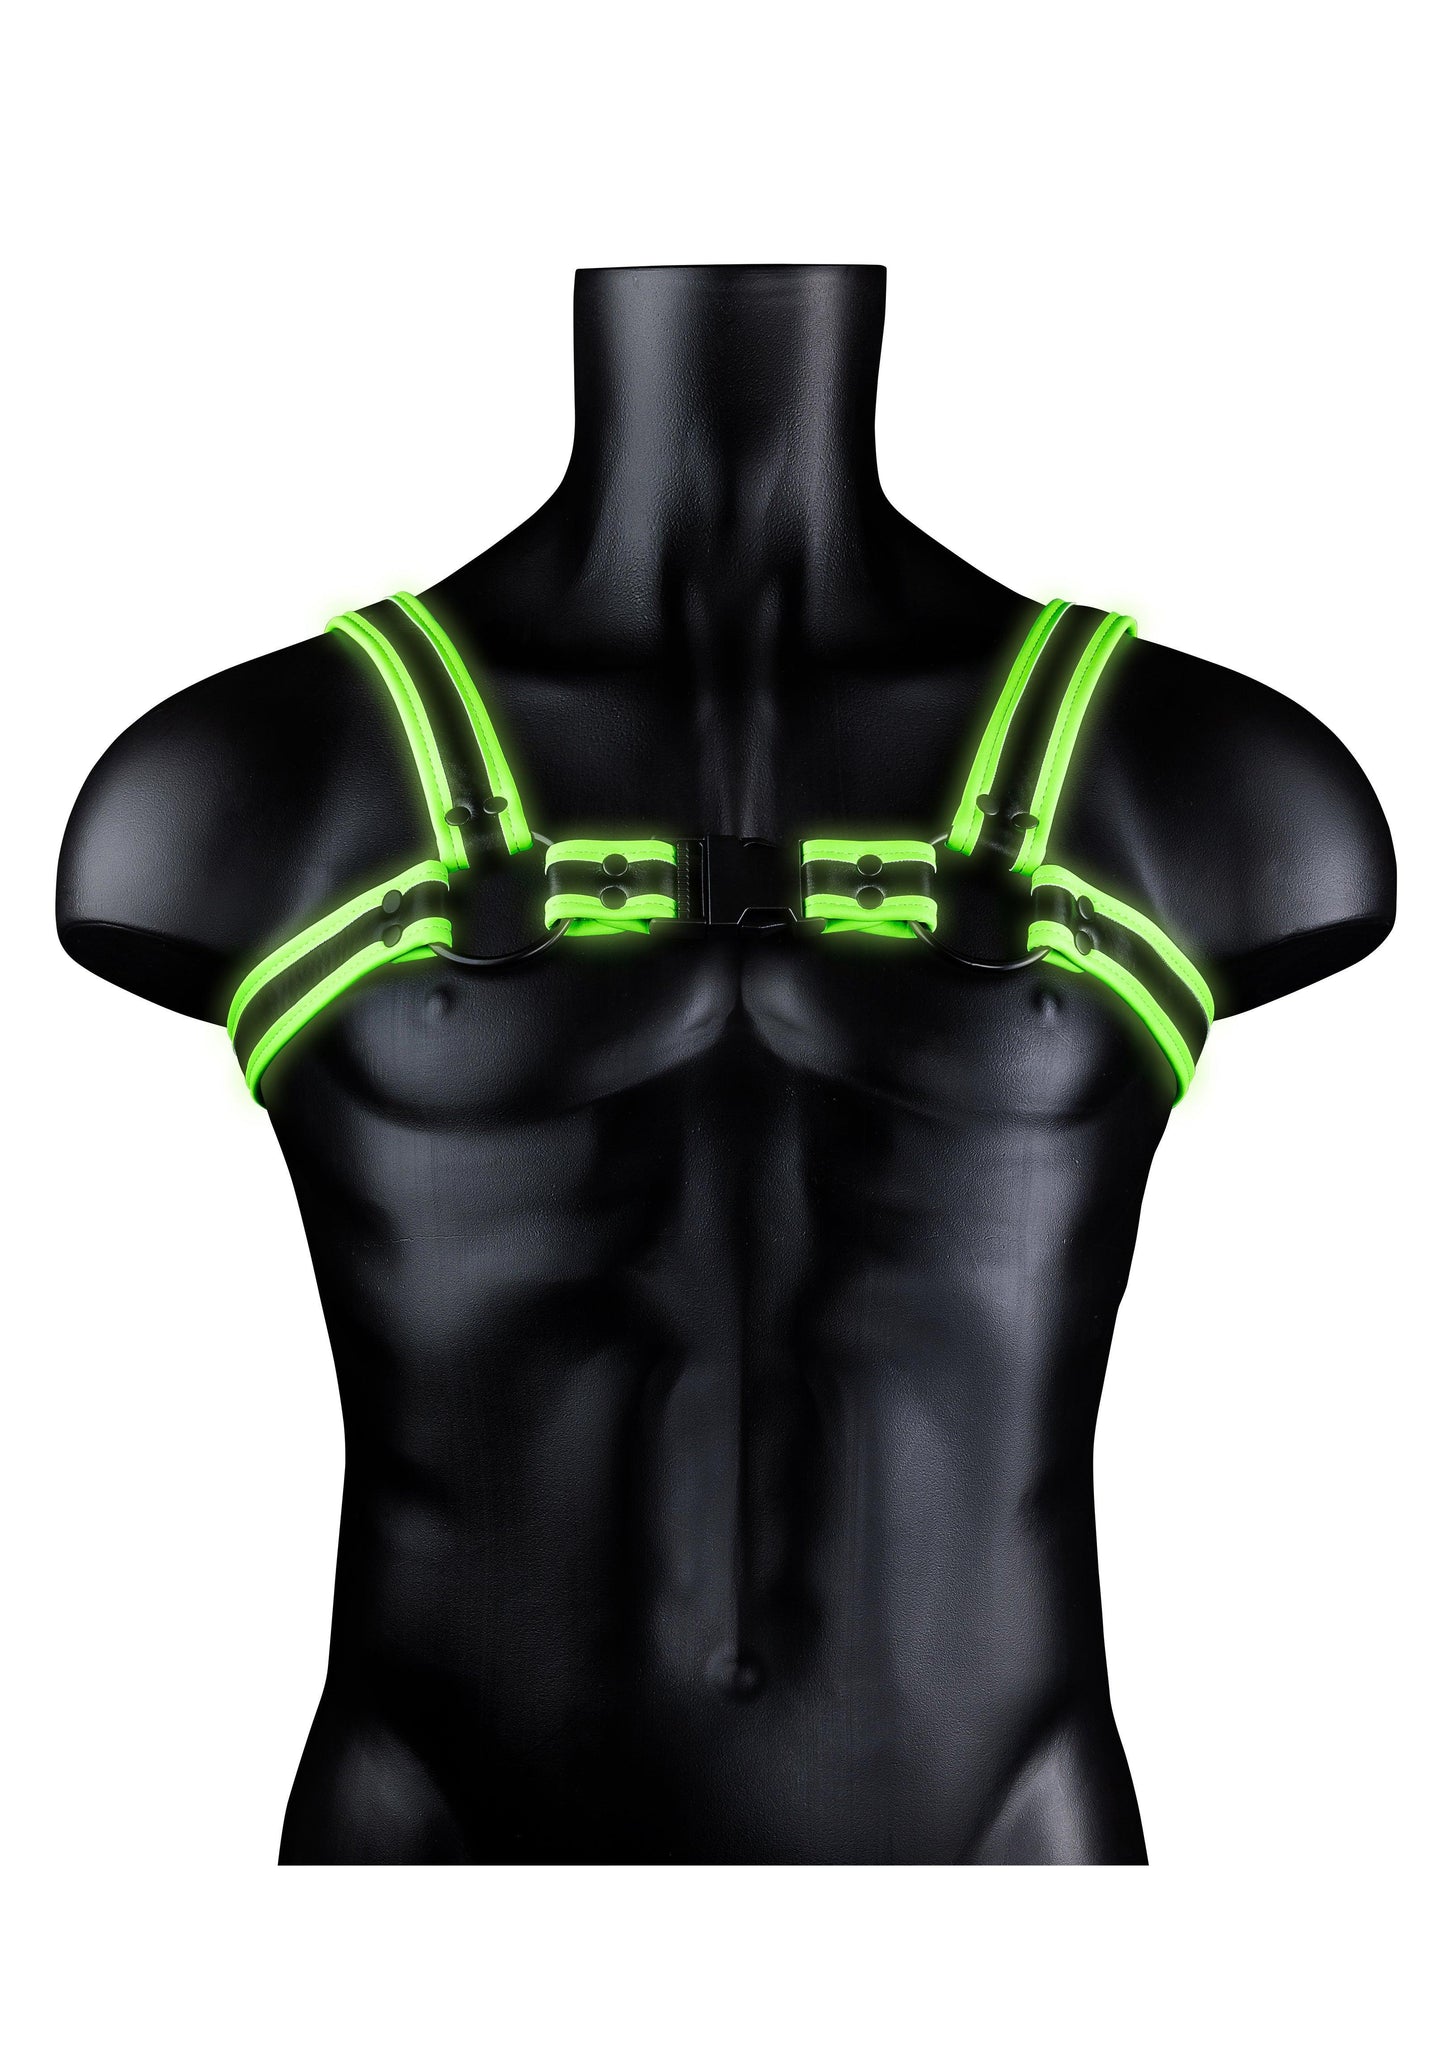 Bonded Leather Buckle Harness - Large/xlarge - Glow in the Dark - My Sex Toy Hub